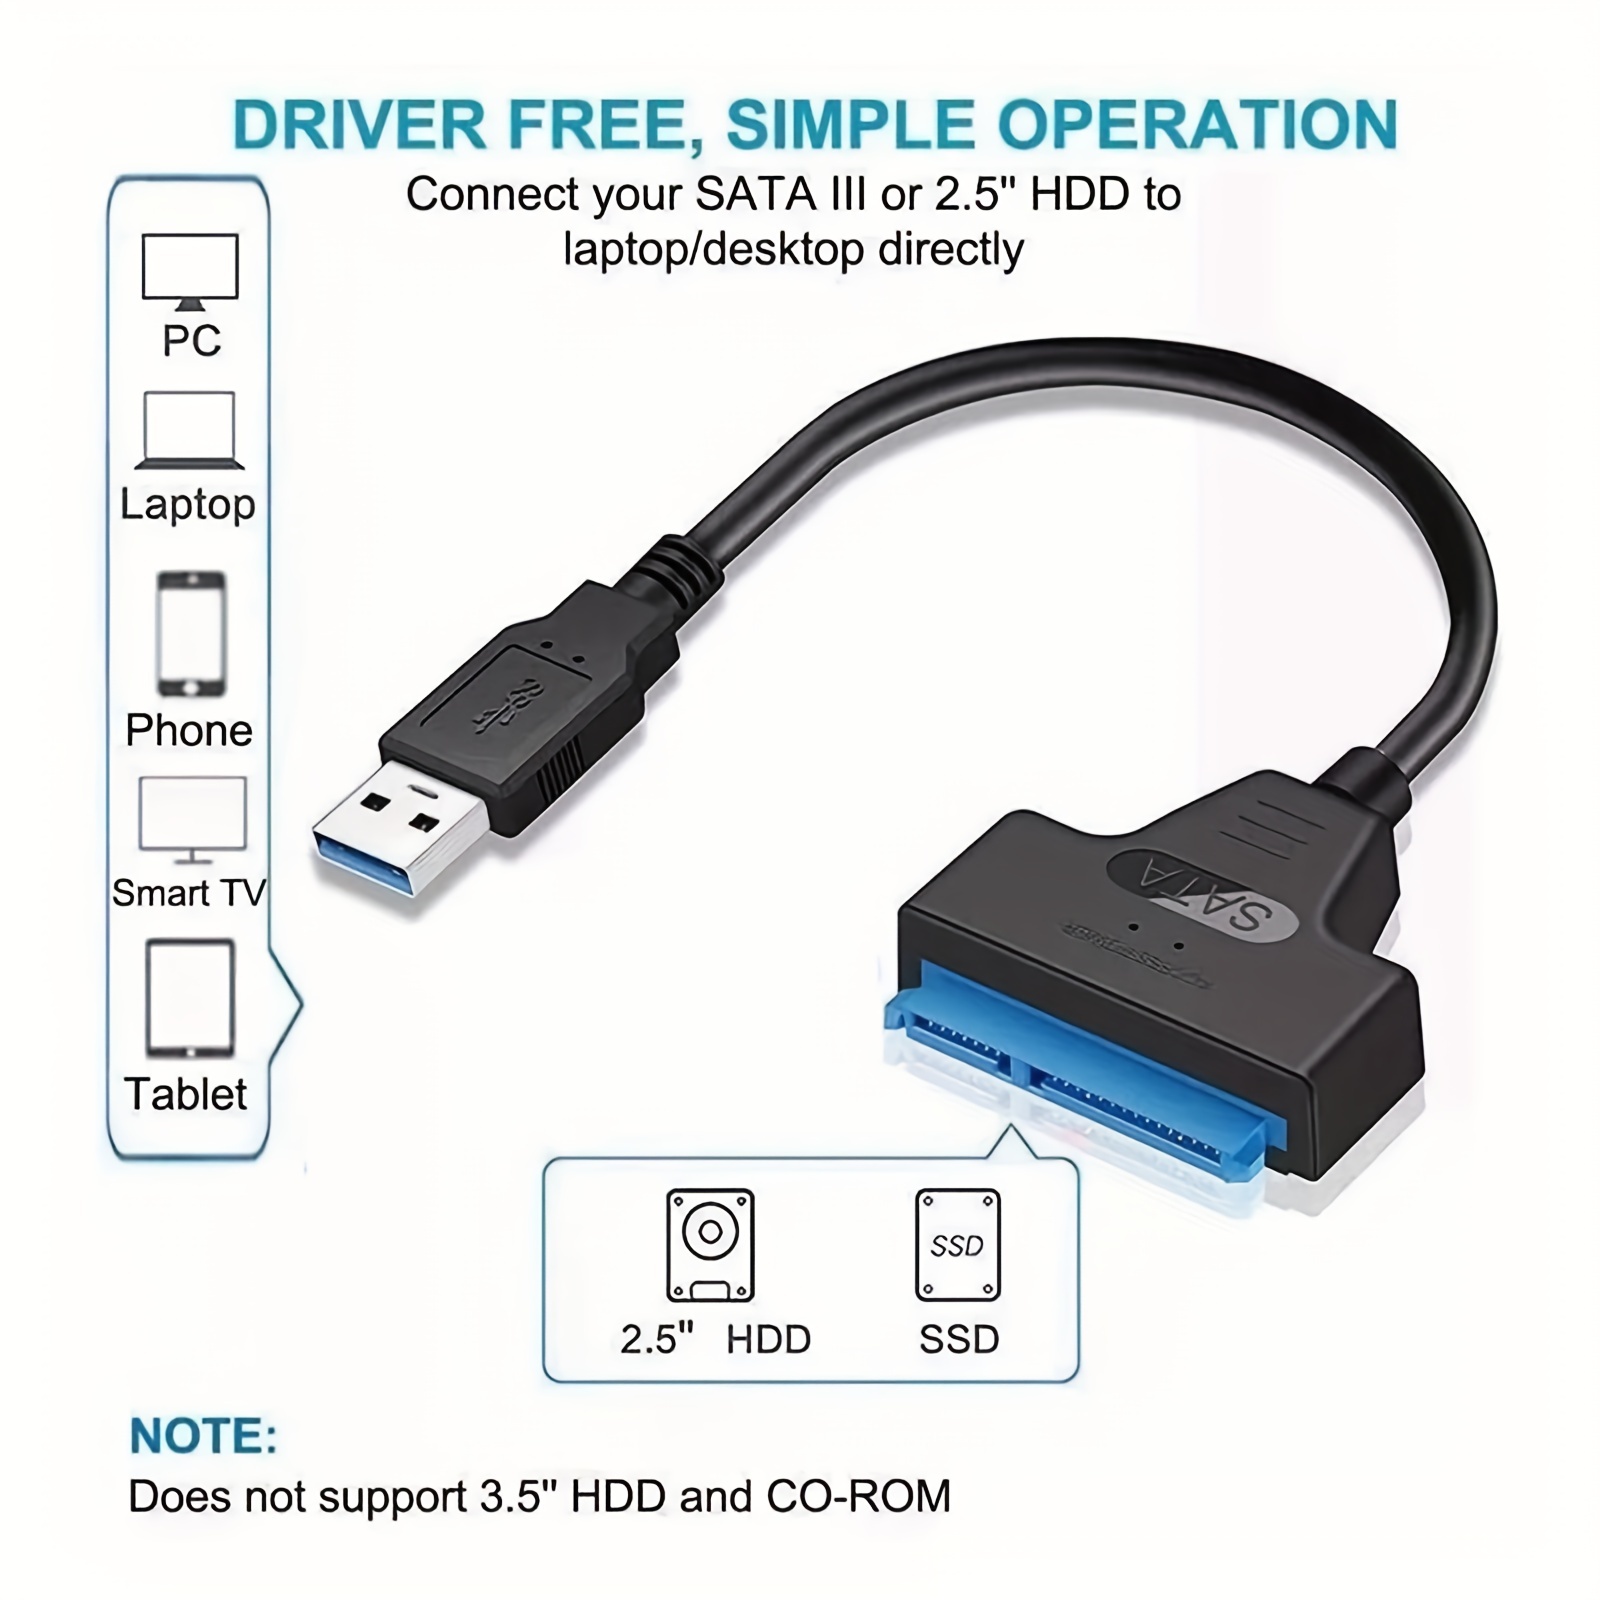 Fast Transfer Speeds up to 10Gbps with USB to SATA Cables